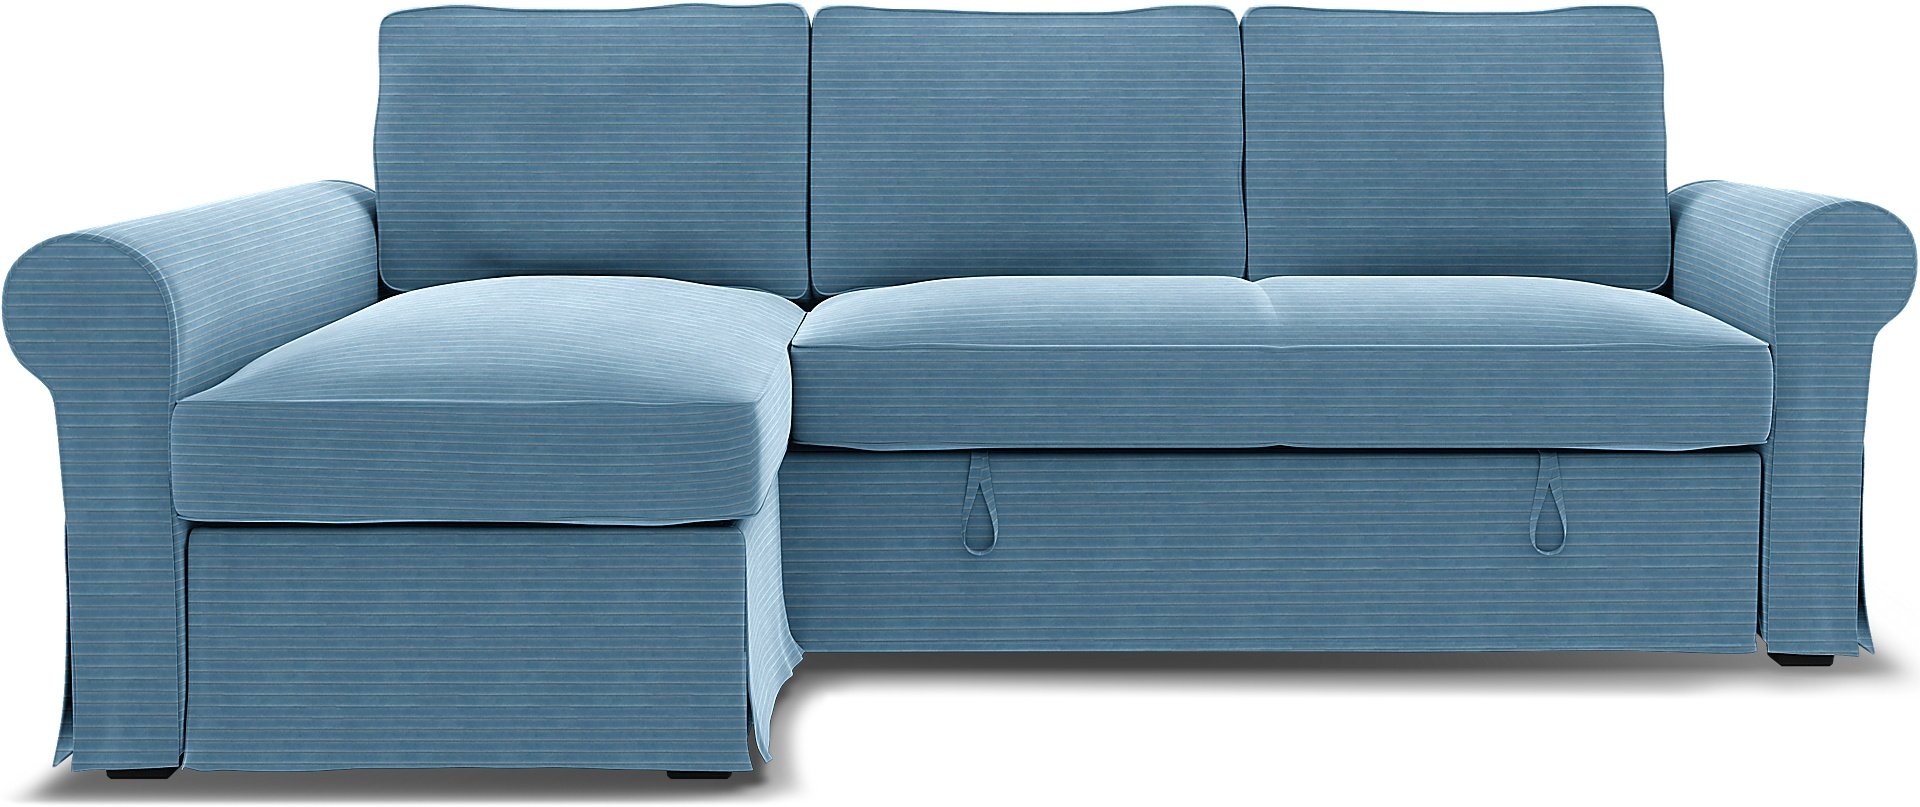 IKEA - Backabro Sofabed with Chaise Cover, Sky Blue, Corduroy - Bemz